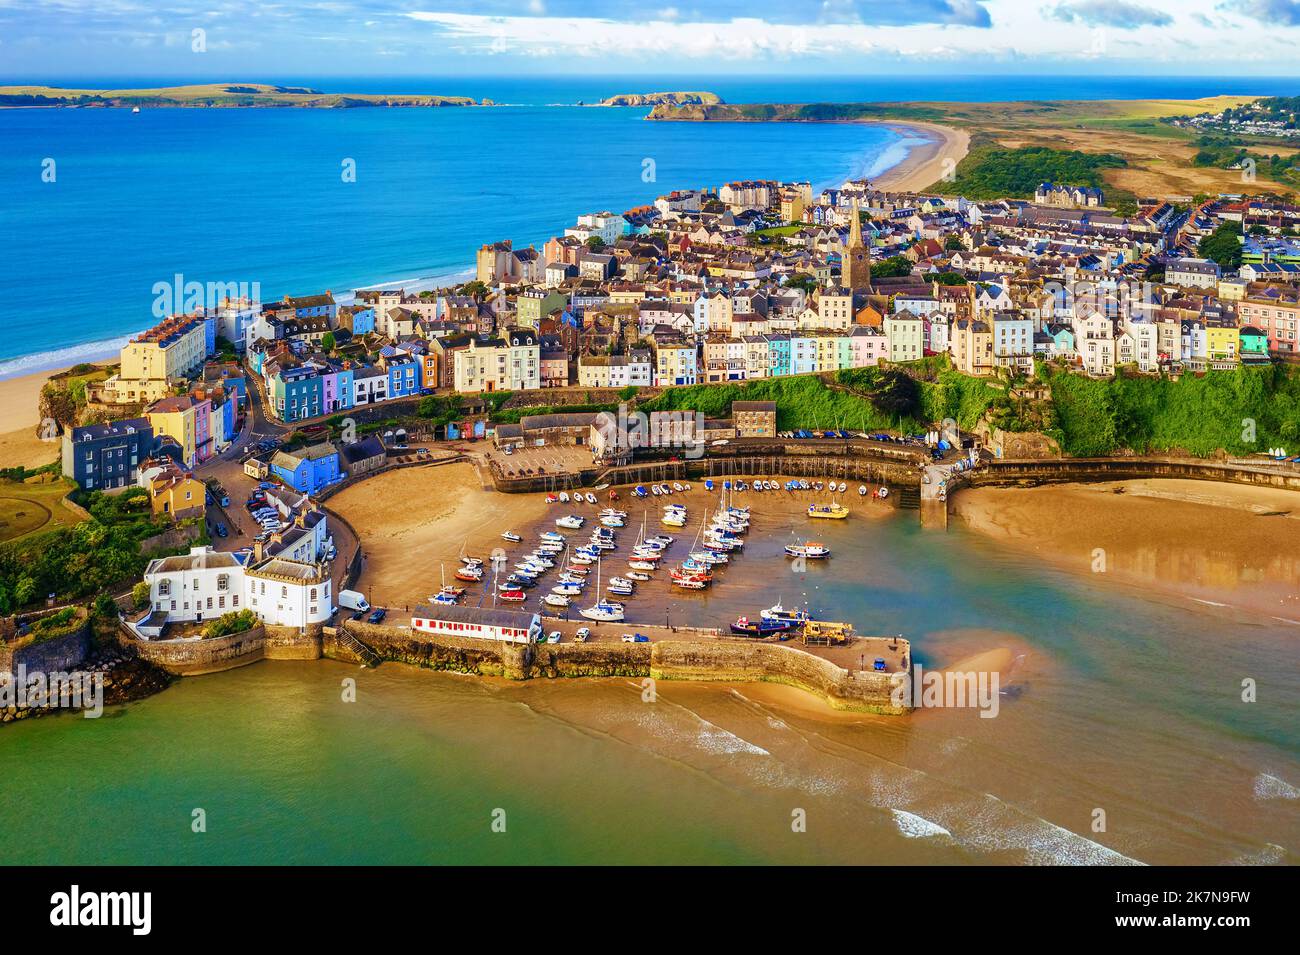 The port and the sand beaches in the Old town of Tenby, a popular resort town famous for its colorful traditional houses and sand beaches in Pembrokes Stock Photo